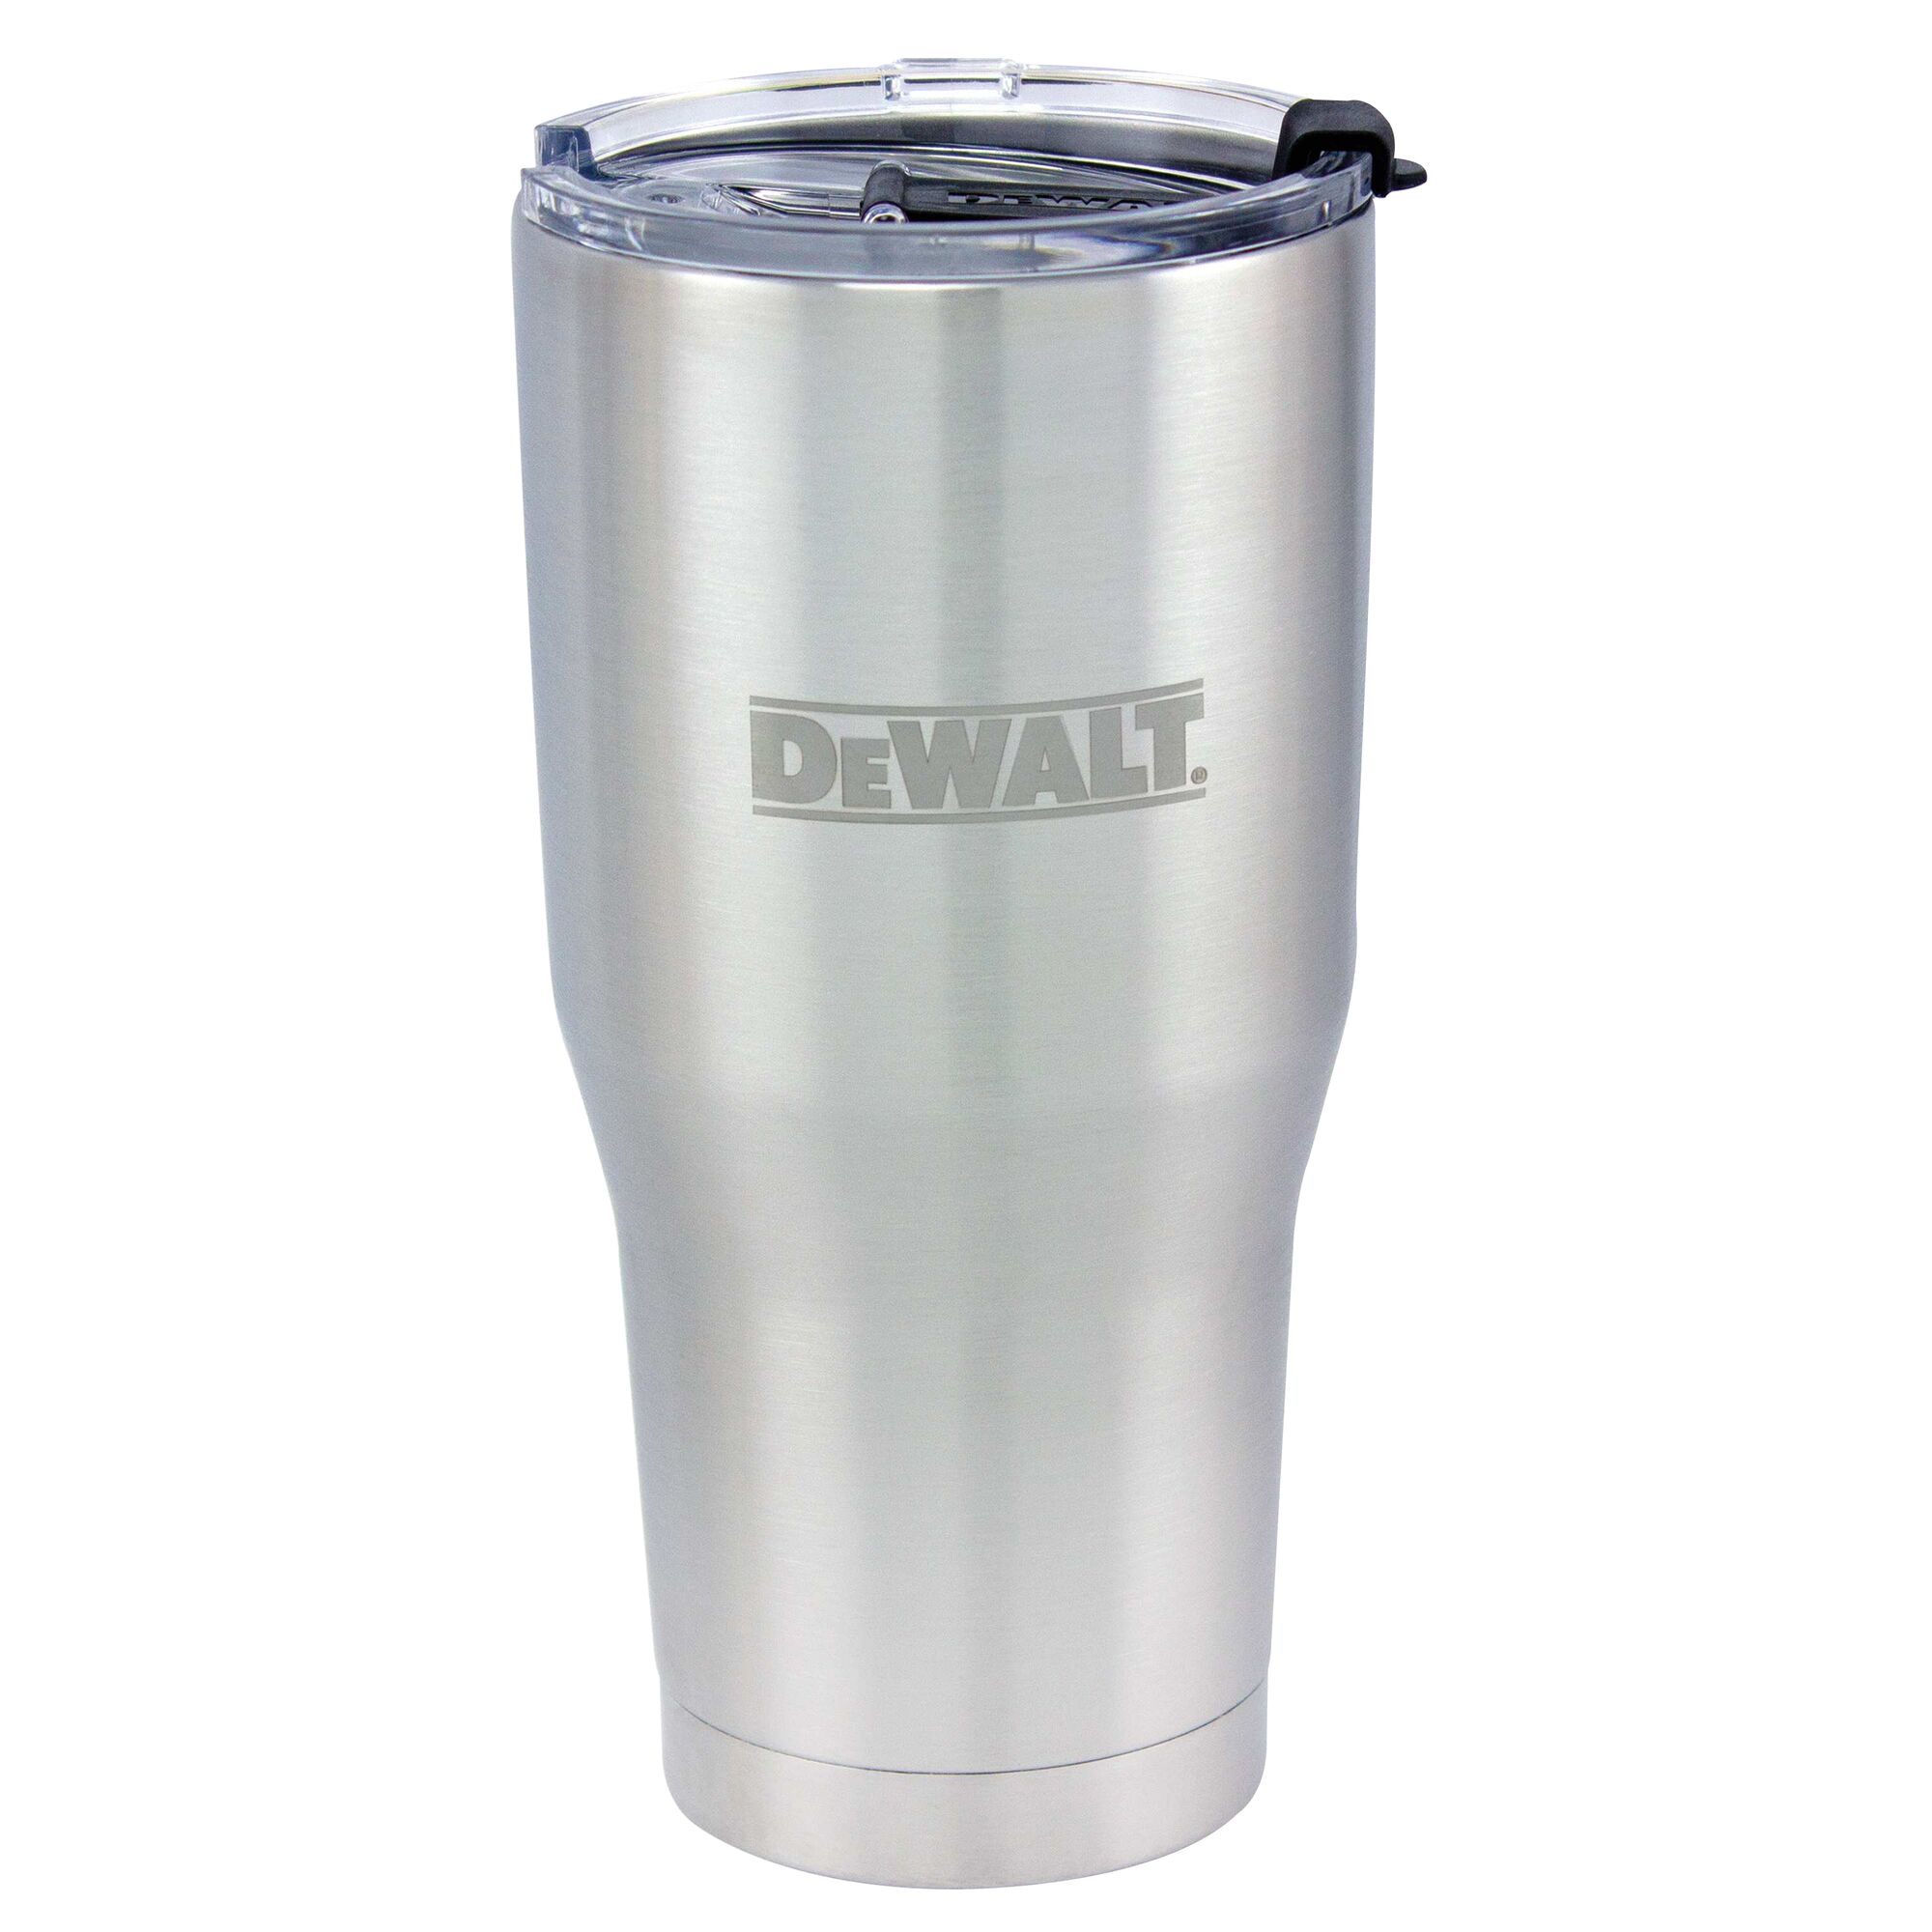 Promotional 16 oz. Thermos® Double Wall Stainless Steel Backpack Bottle